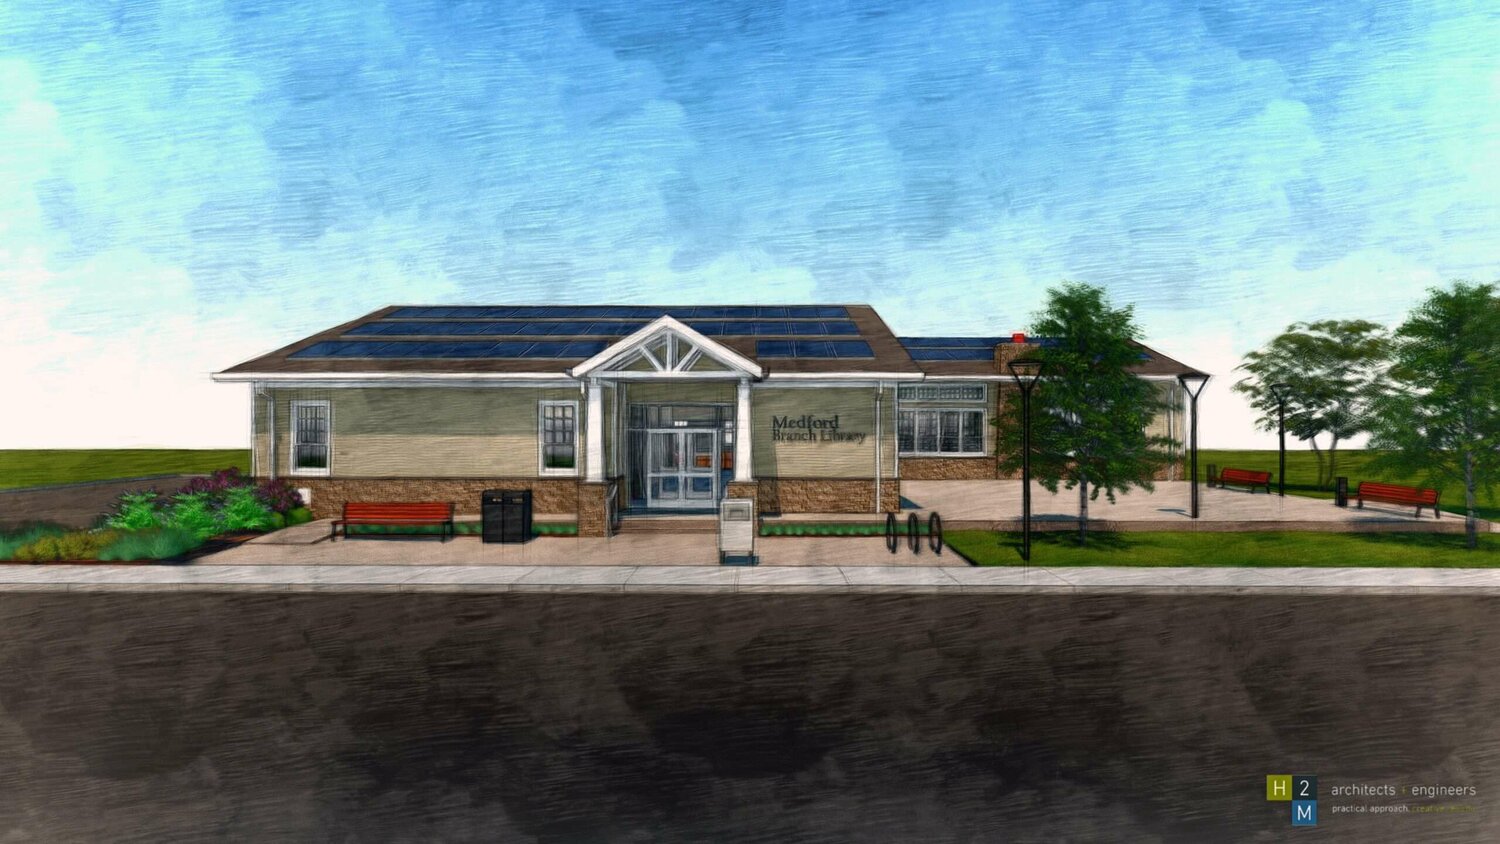 The State Department of Education awarded Patchogue-Medford Library $249,865 for a parking lot and conduits for future EV charging stations at the new library branch in Medford.